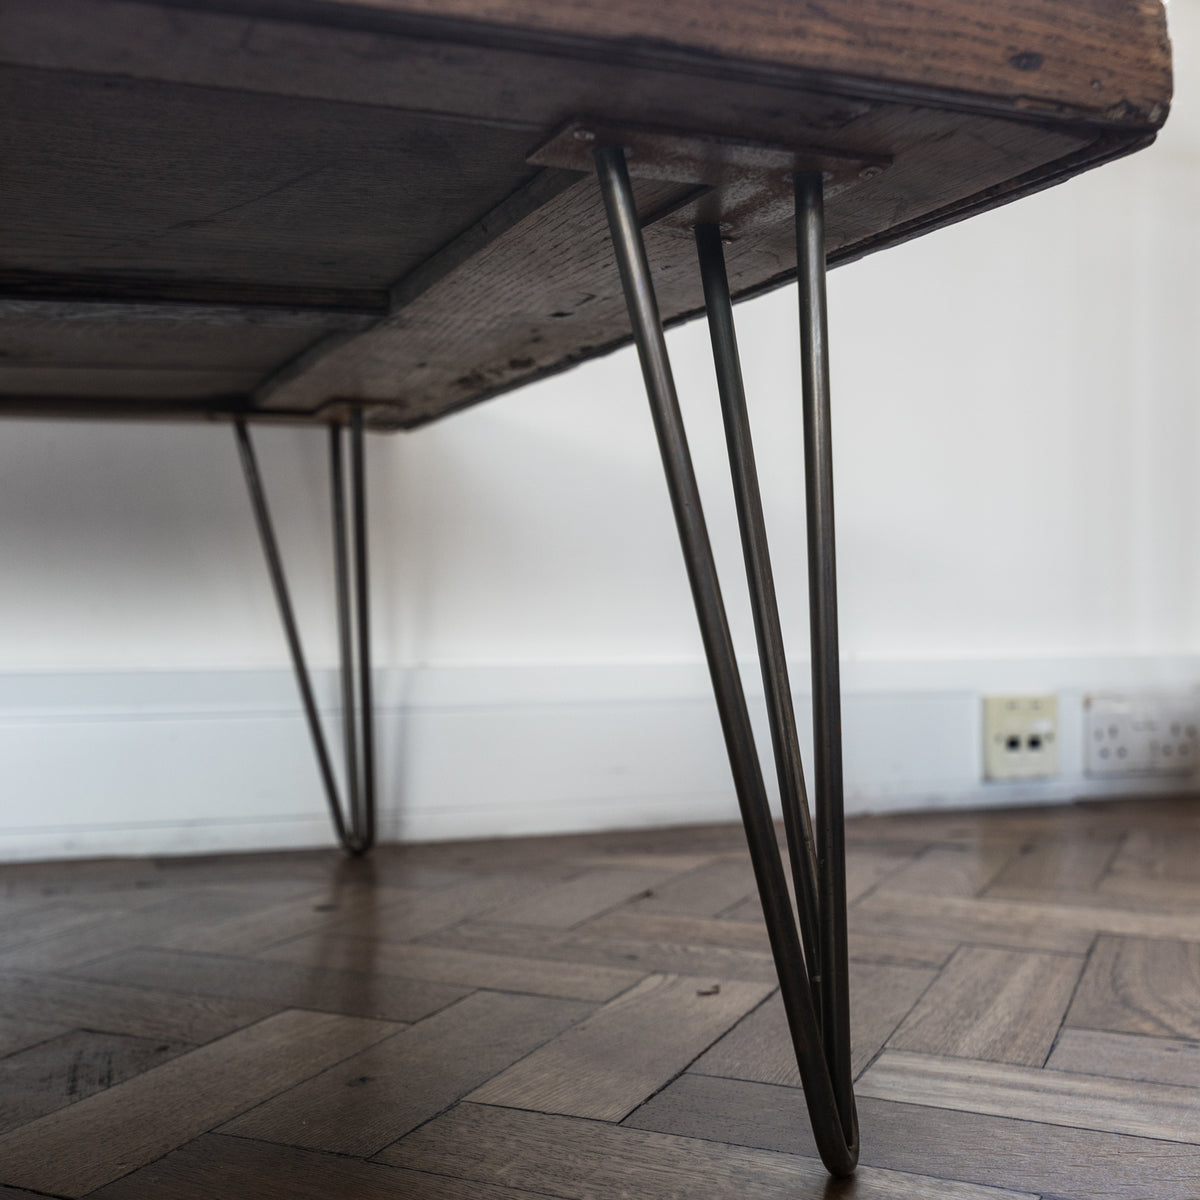 Large Oak Plank Top Coffee Table With Hairpin Legs | The Architectural Forum